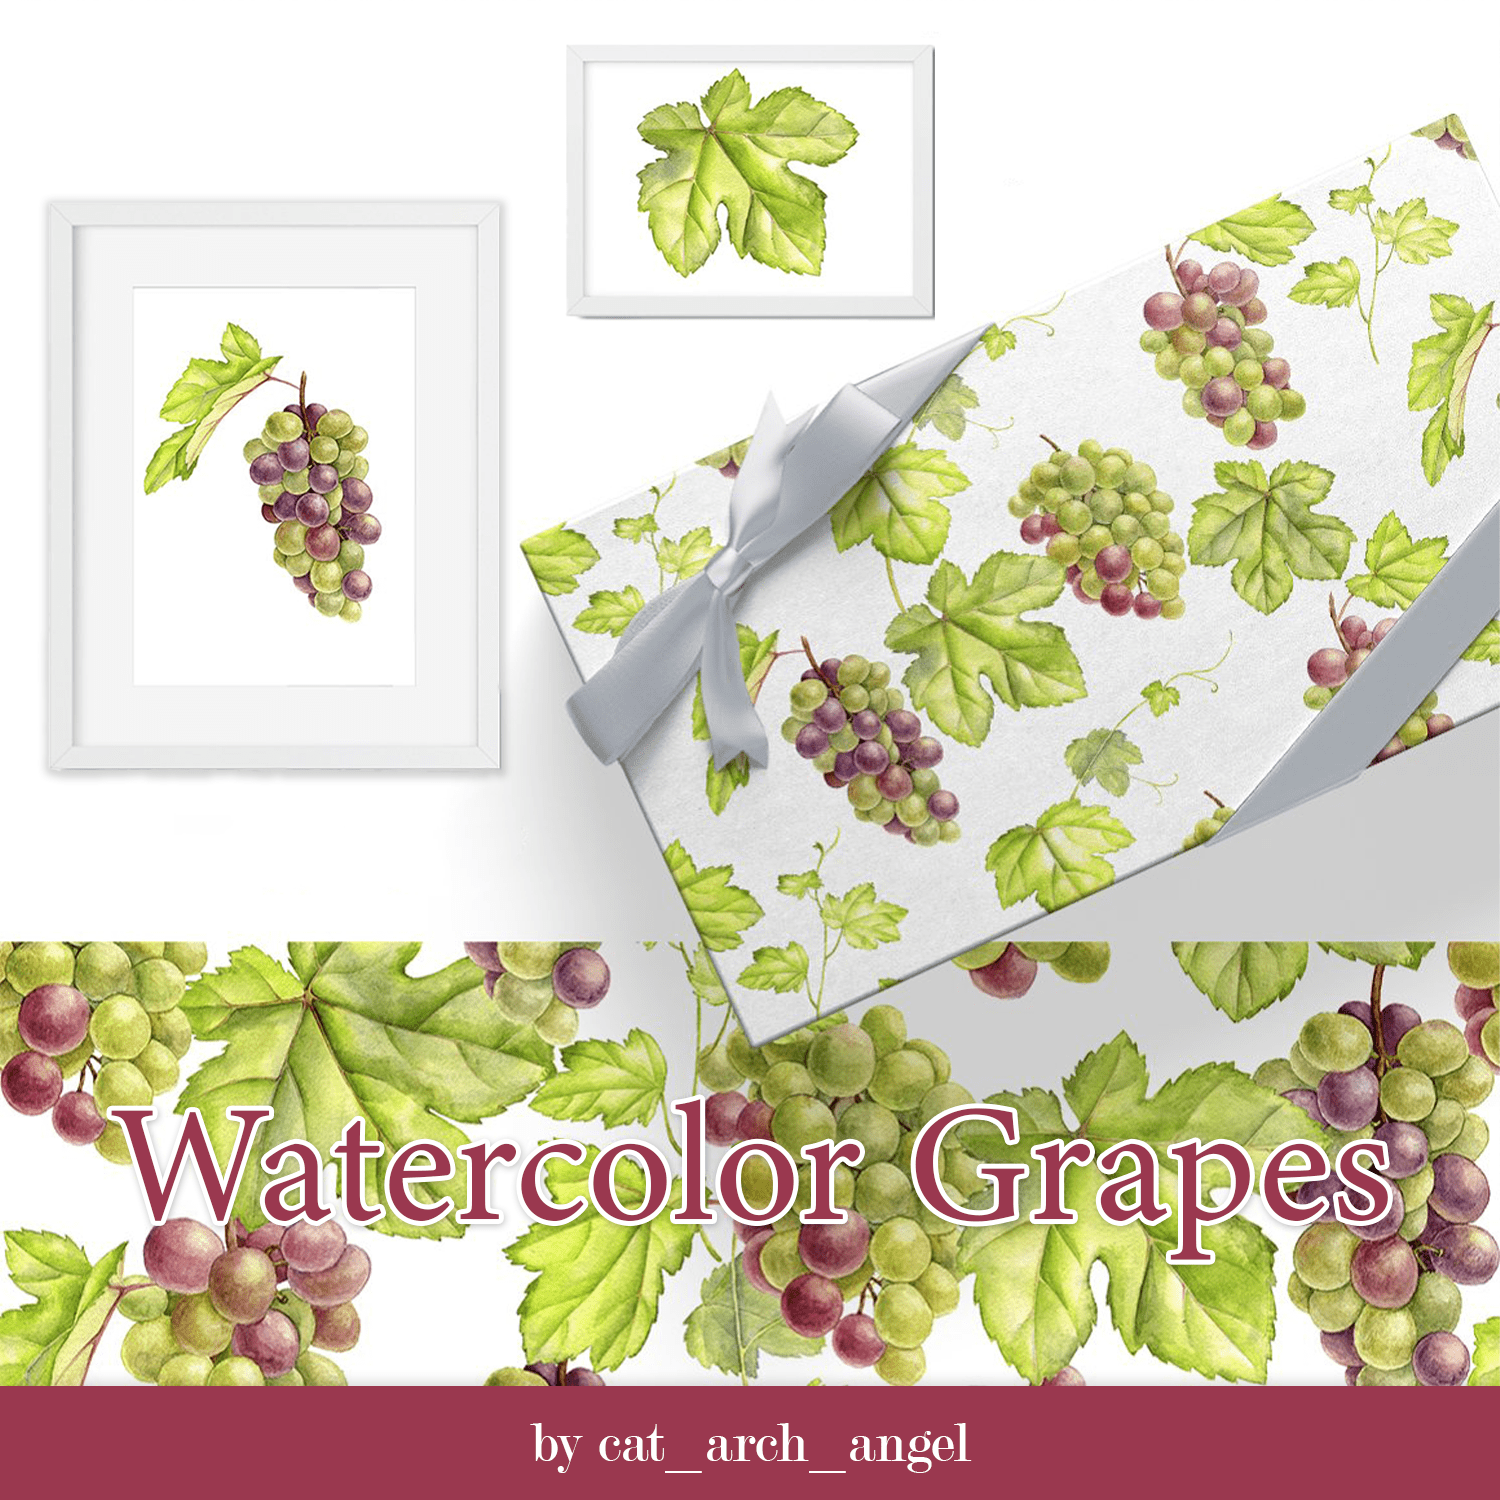 Watercolor grapes created by cat_arch_angel.